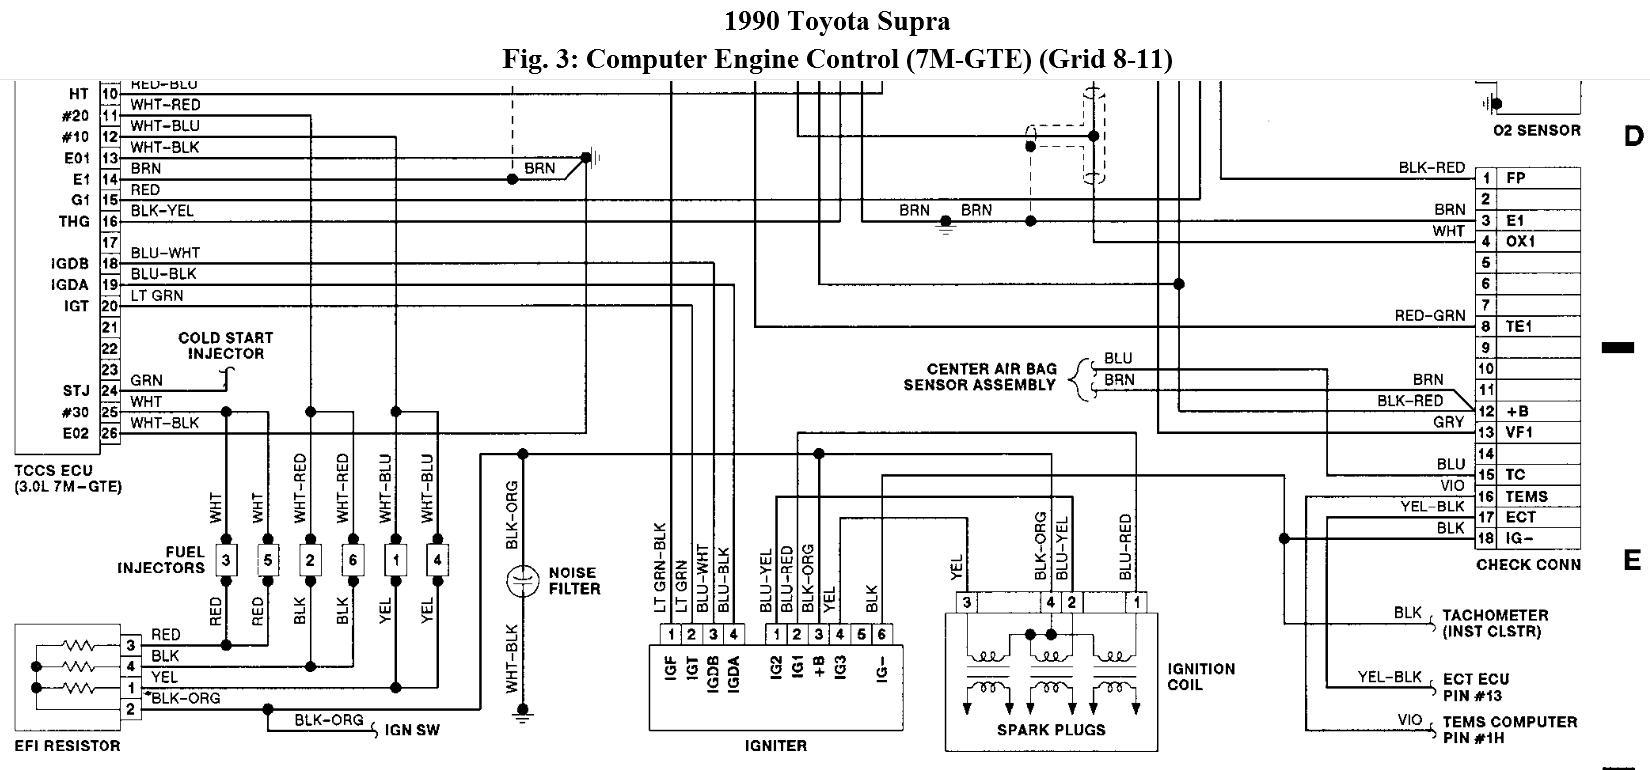 Wiring: Need Wiring Schematic for a 7m-gte Engine in a 1990 Ceiica...